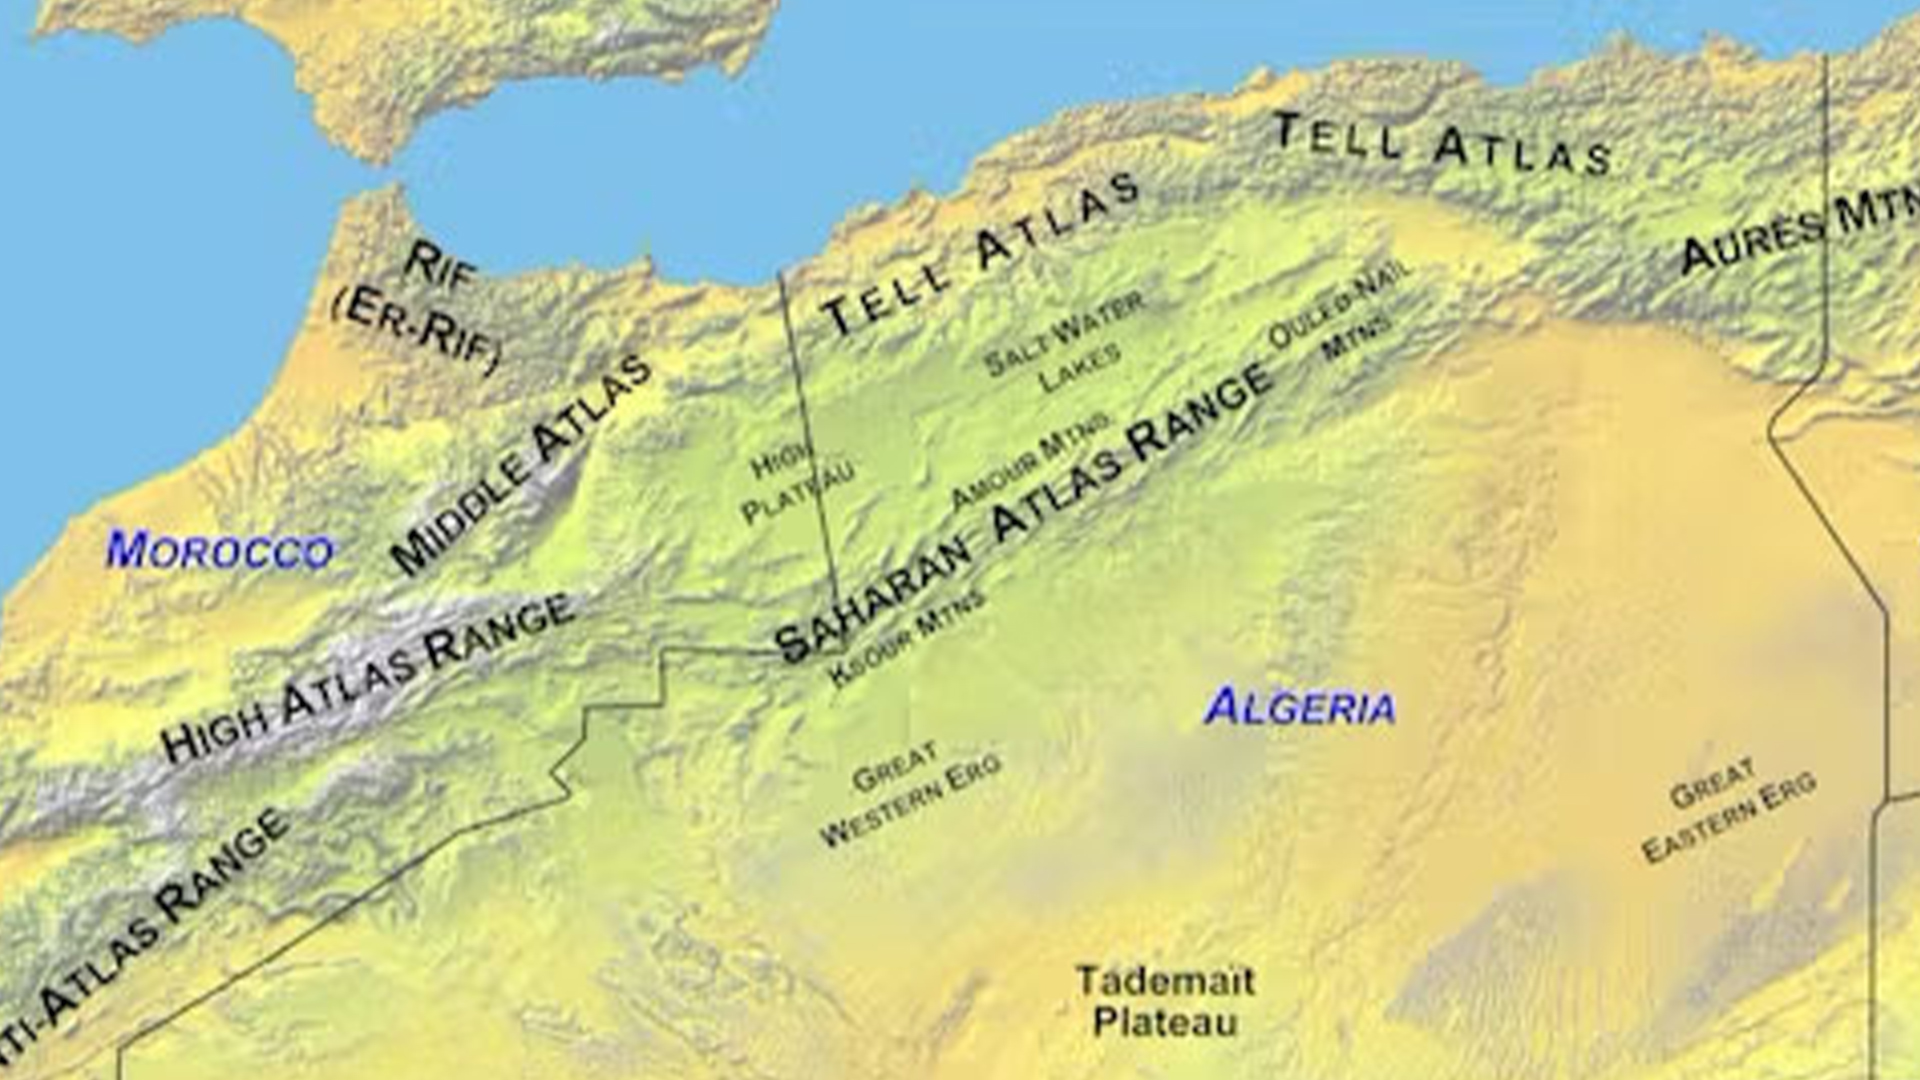 Map of the Atlas Mountains in northern Africa.